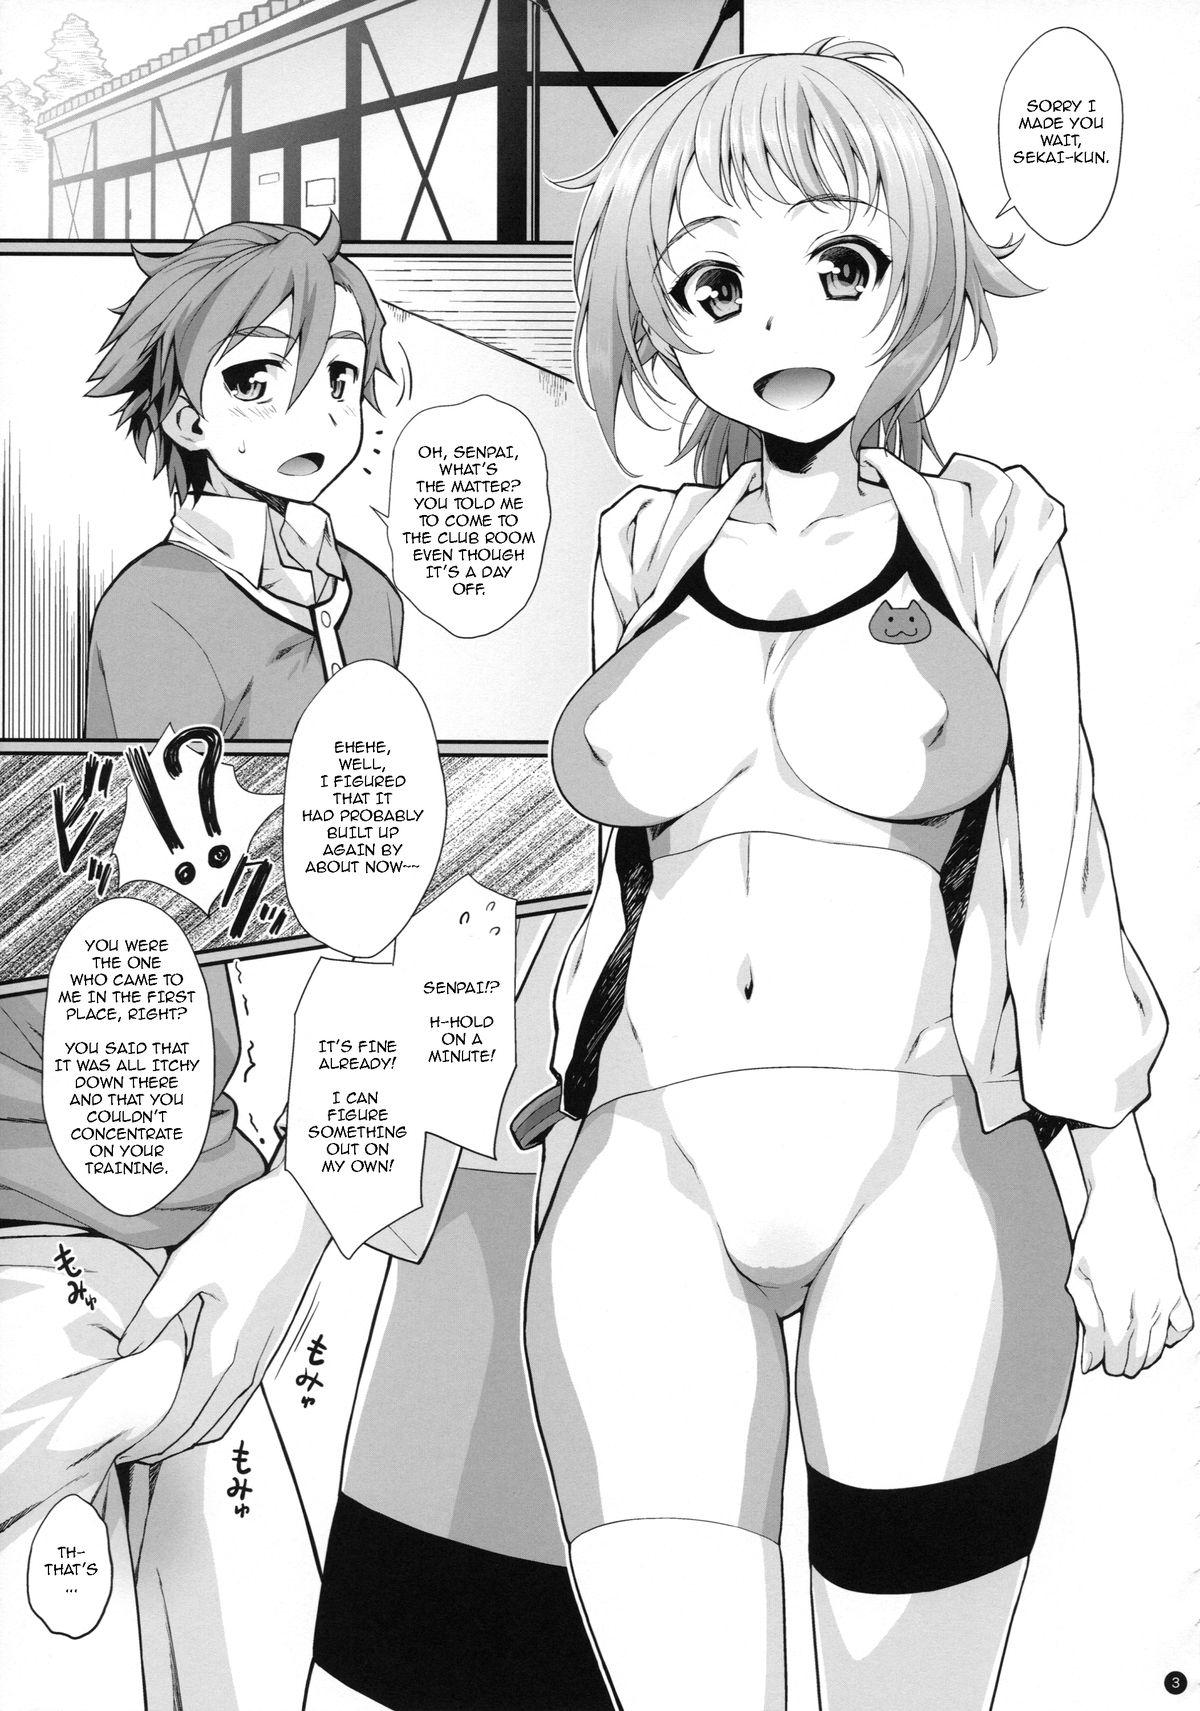 Creampies TRY ESCALATION - Gundam build fighters try Daring - Page 5